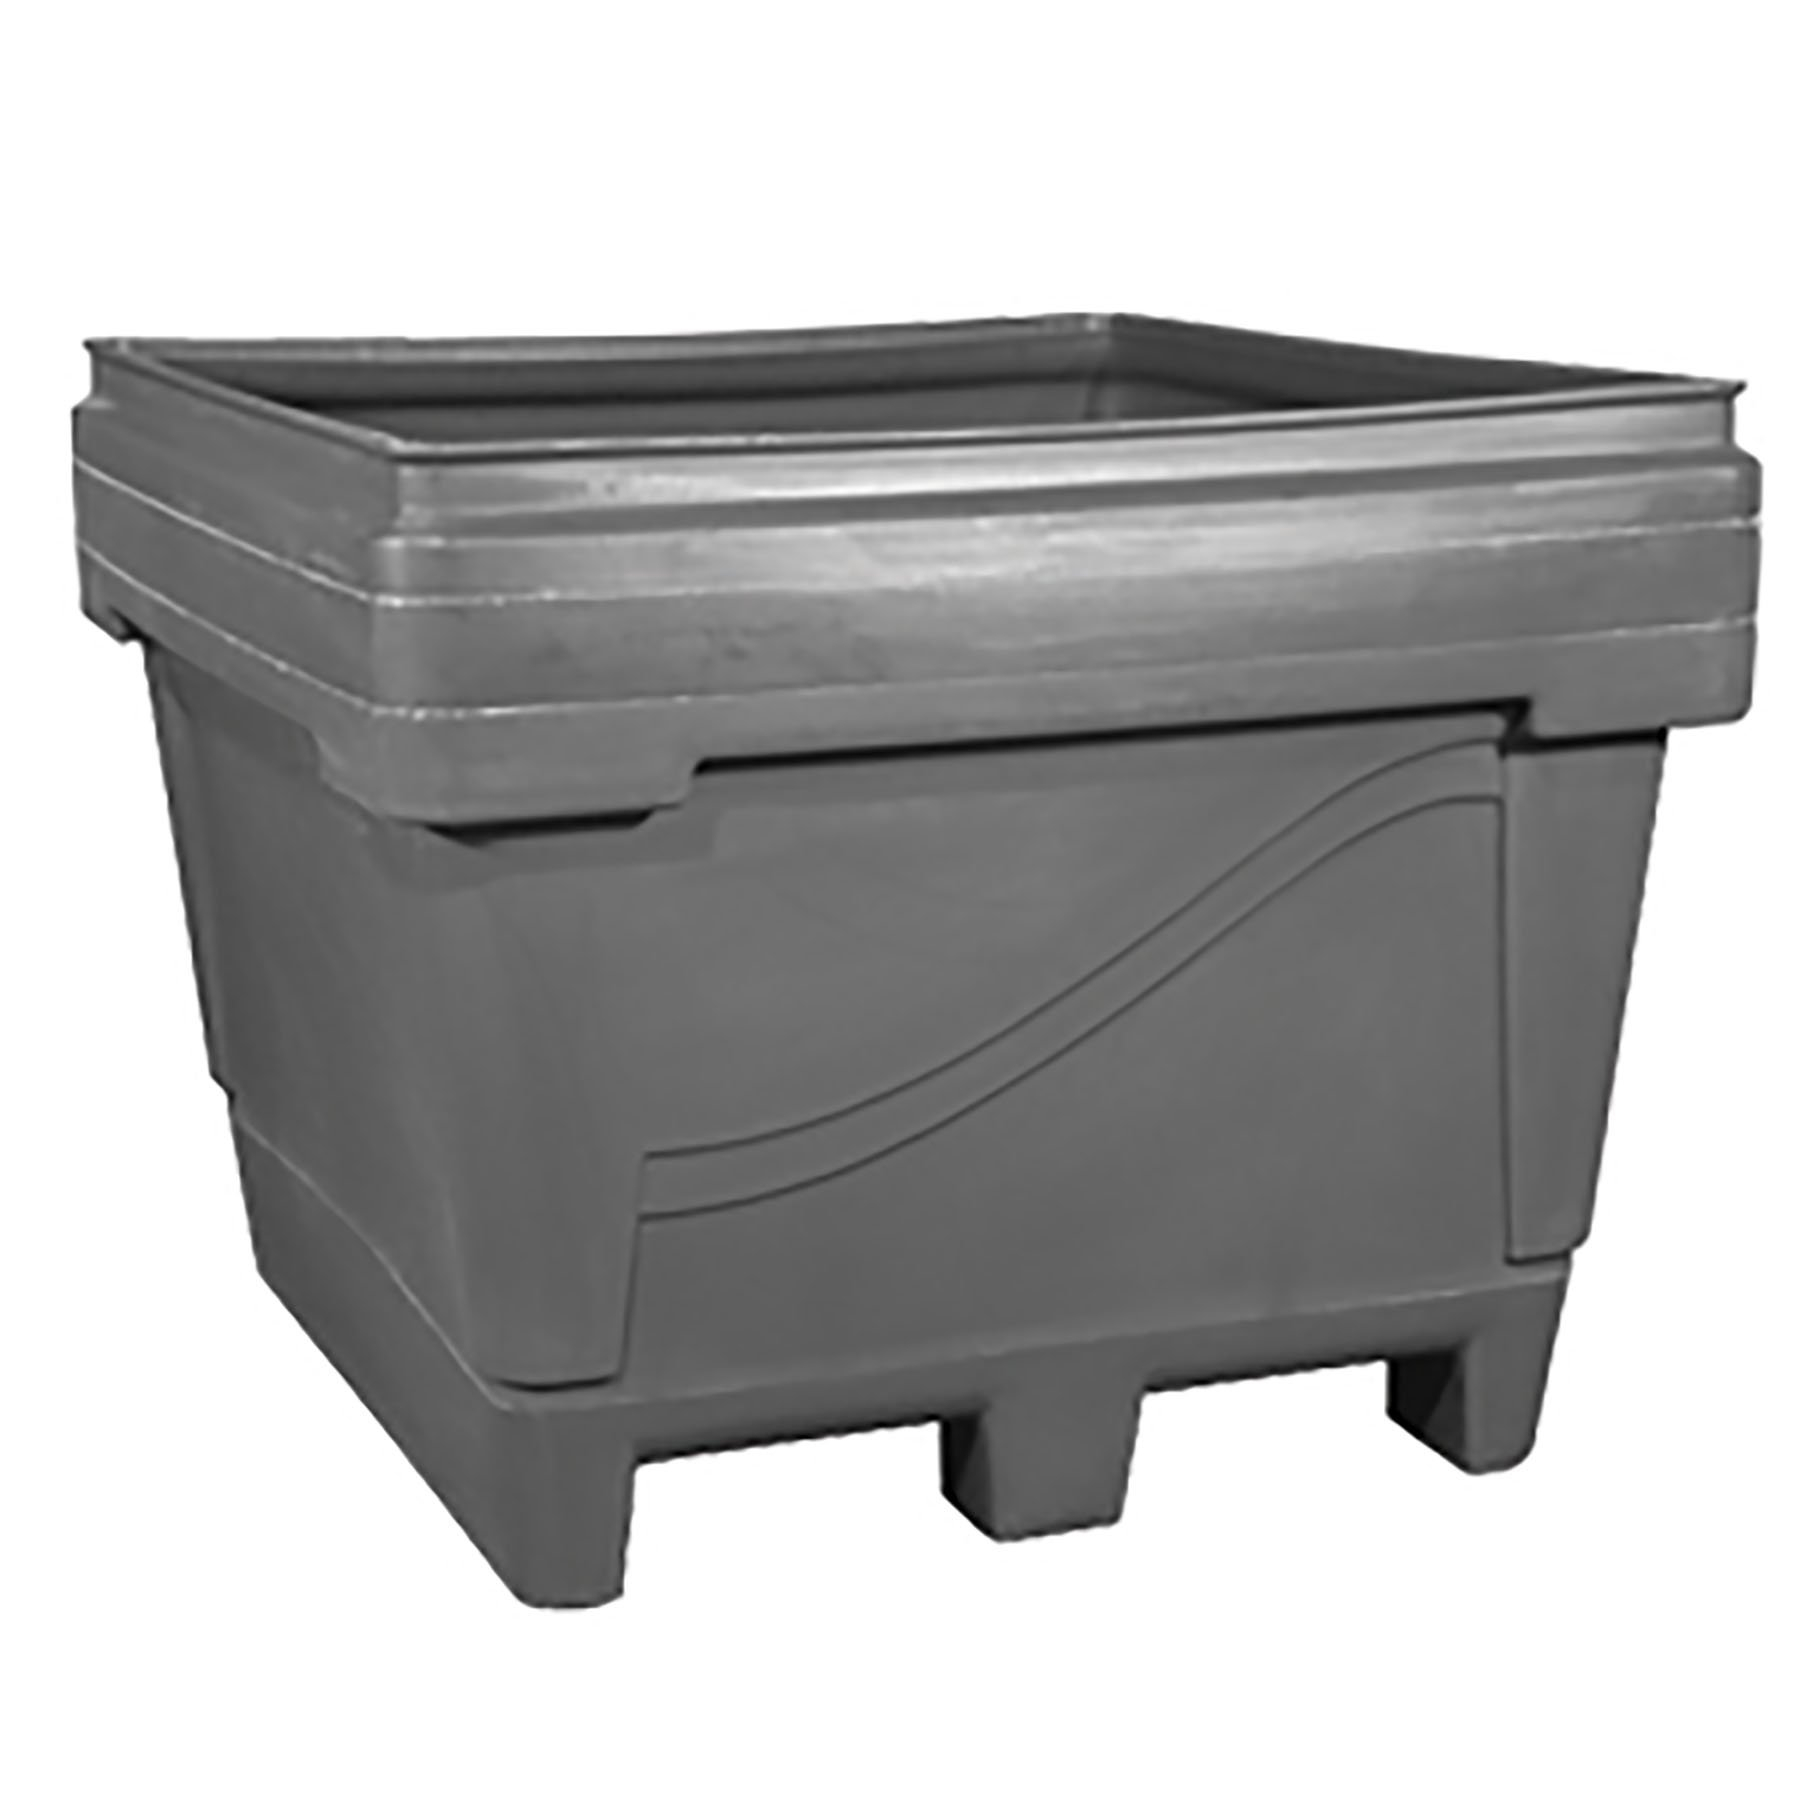 Ibc Totes Intermediate Bulk Containers The Cary Company intended for proportions 1800 X 1800